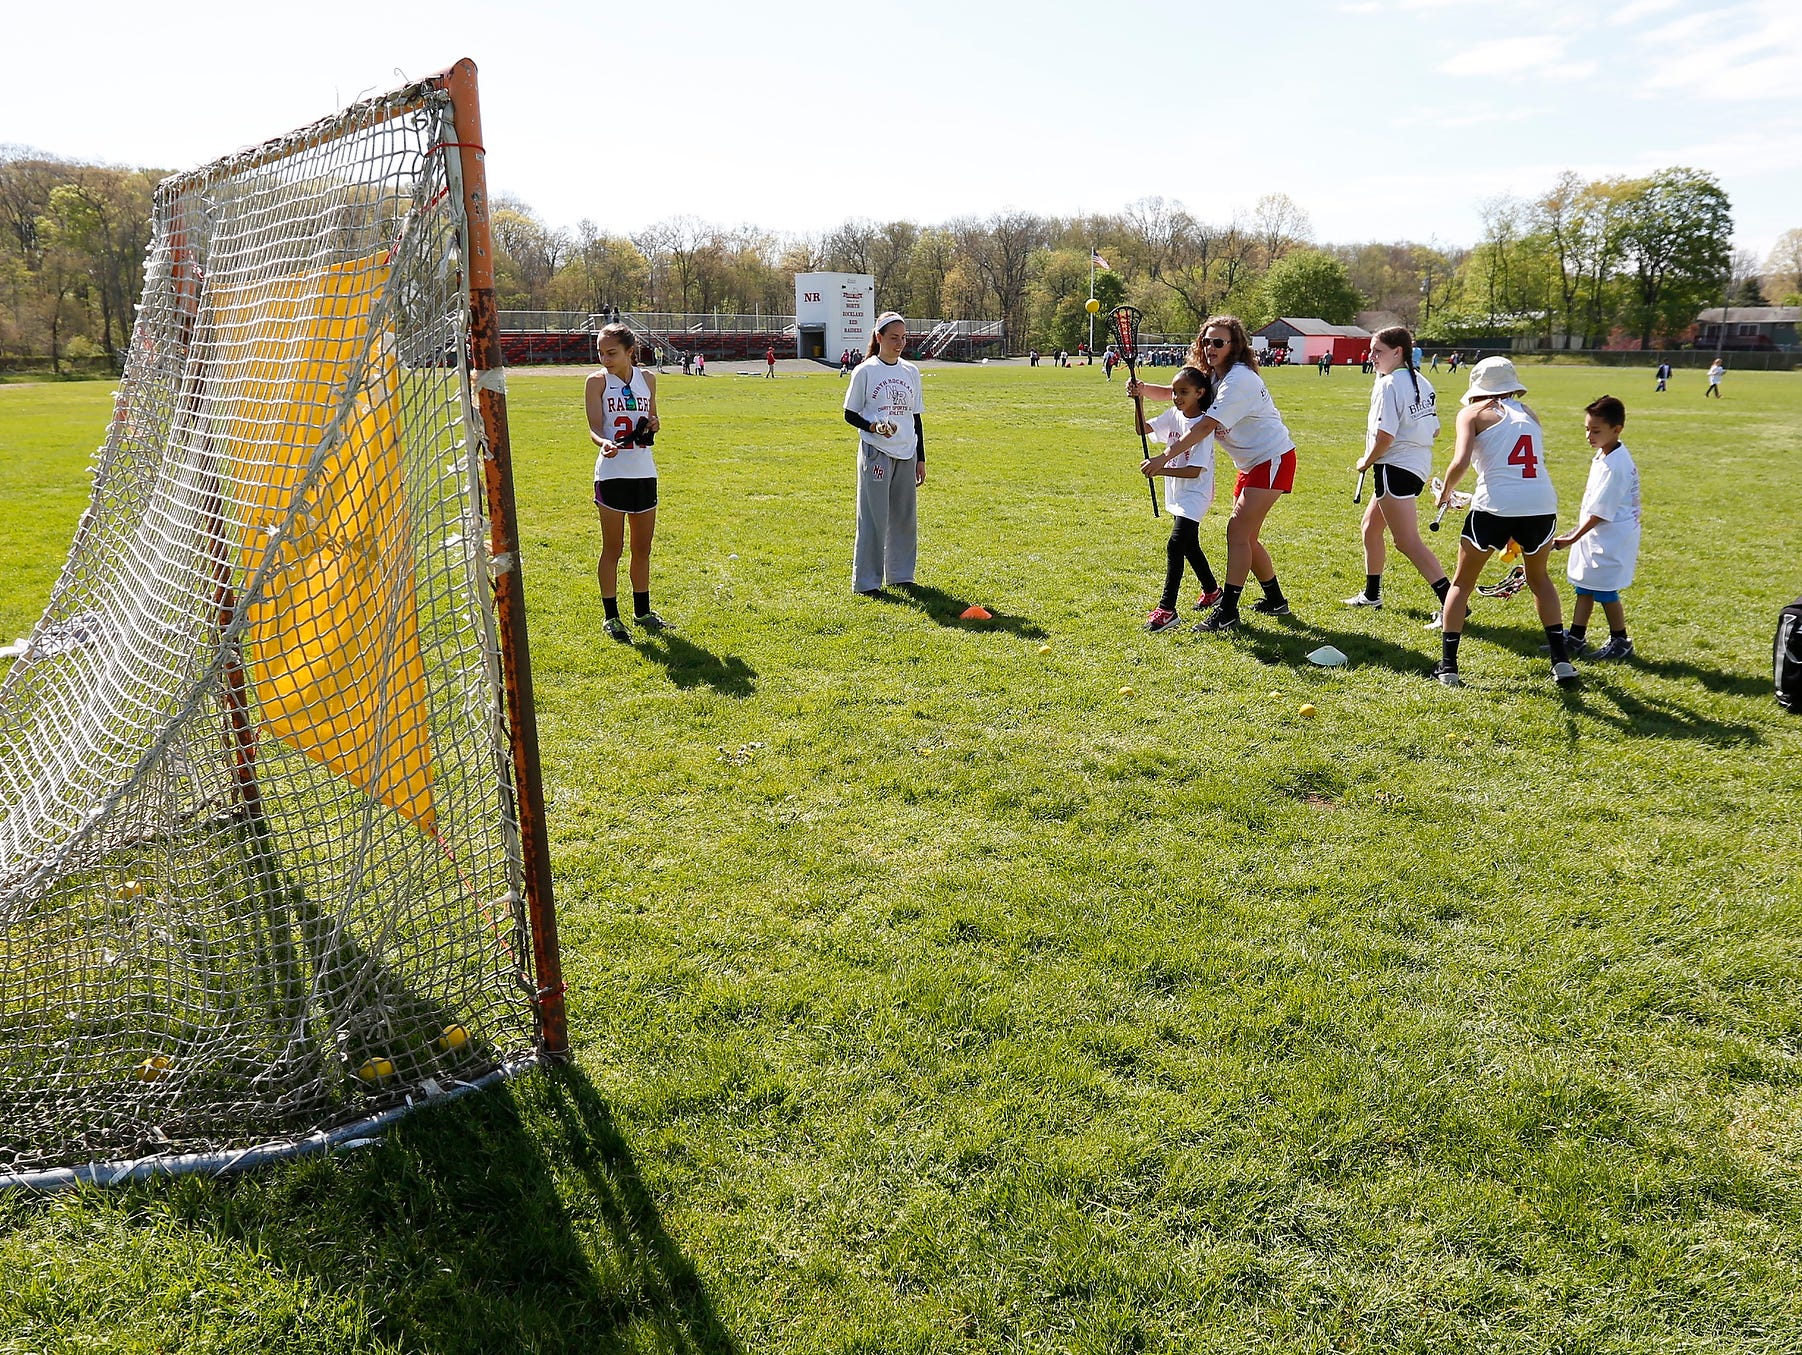 Scenes from the second annual "Sports Day for Charity" event at North Rockland High School in Thiells on Saturday, April 30, 2016.